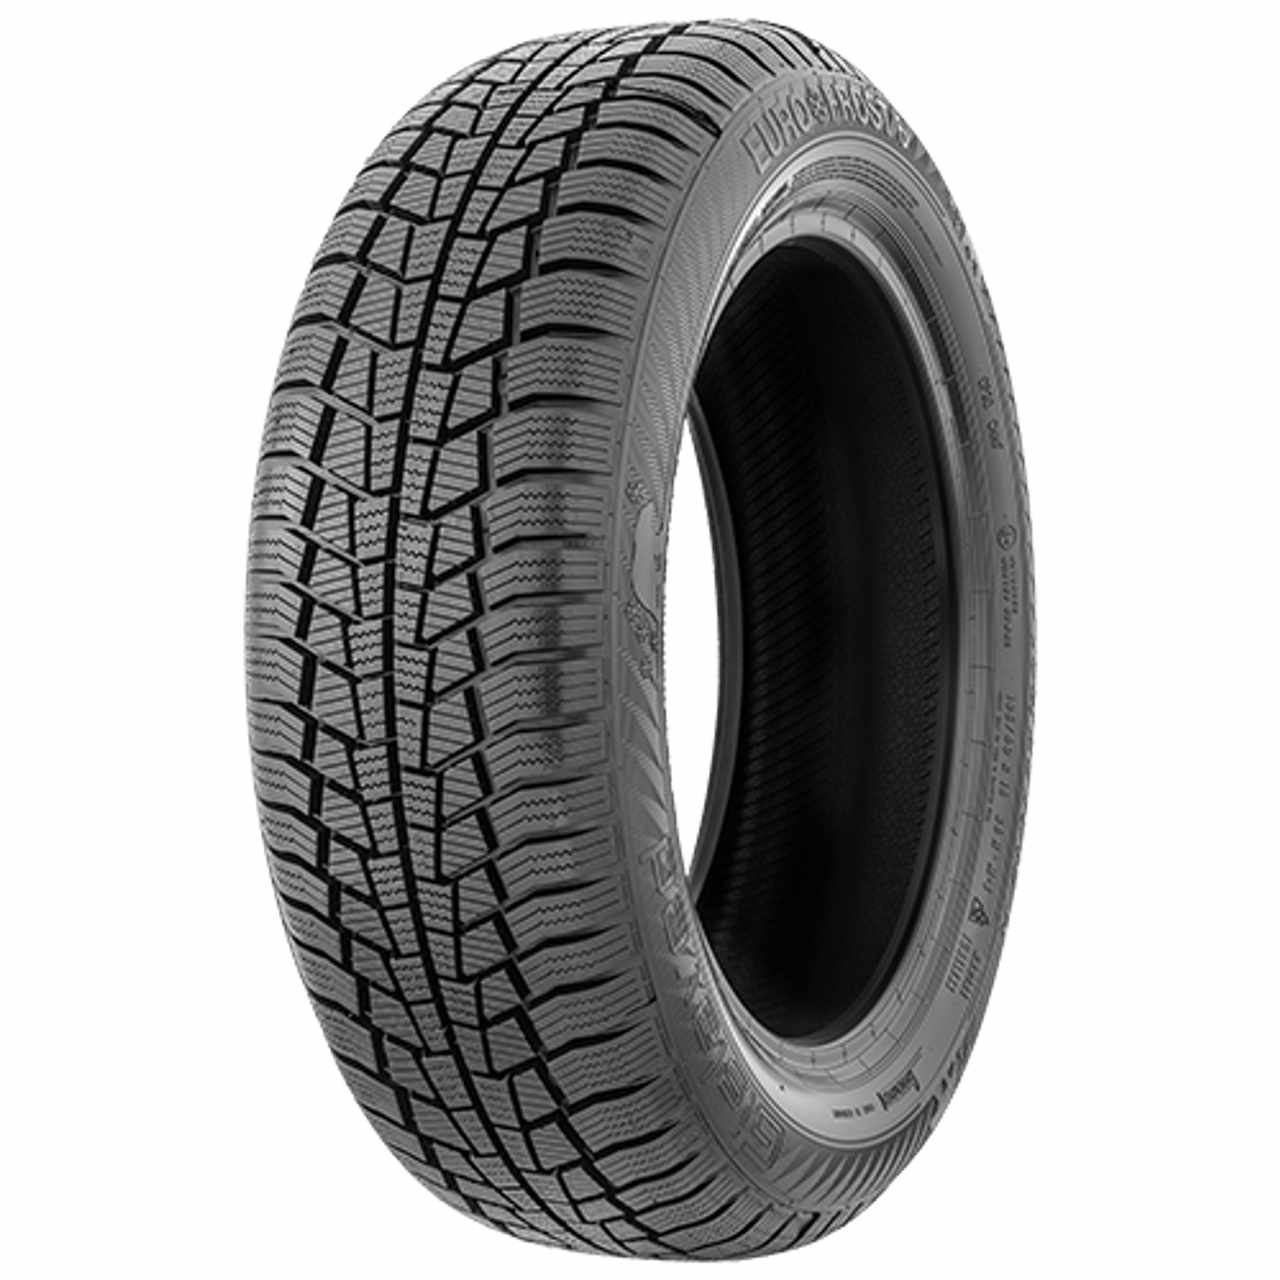 GISLAVED EURO*FROST 6 195/55R15 85H